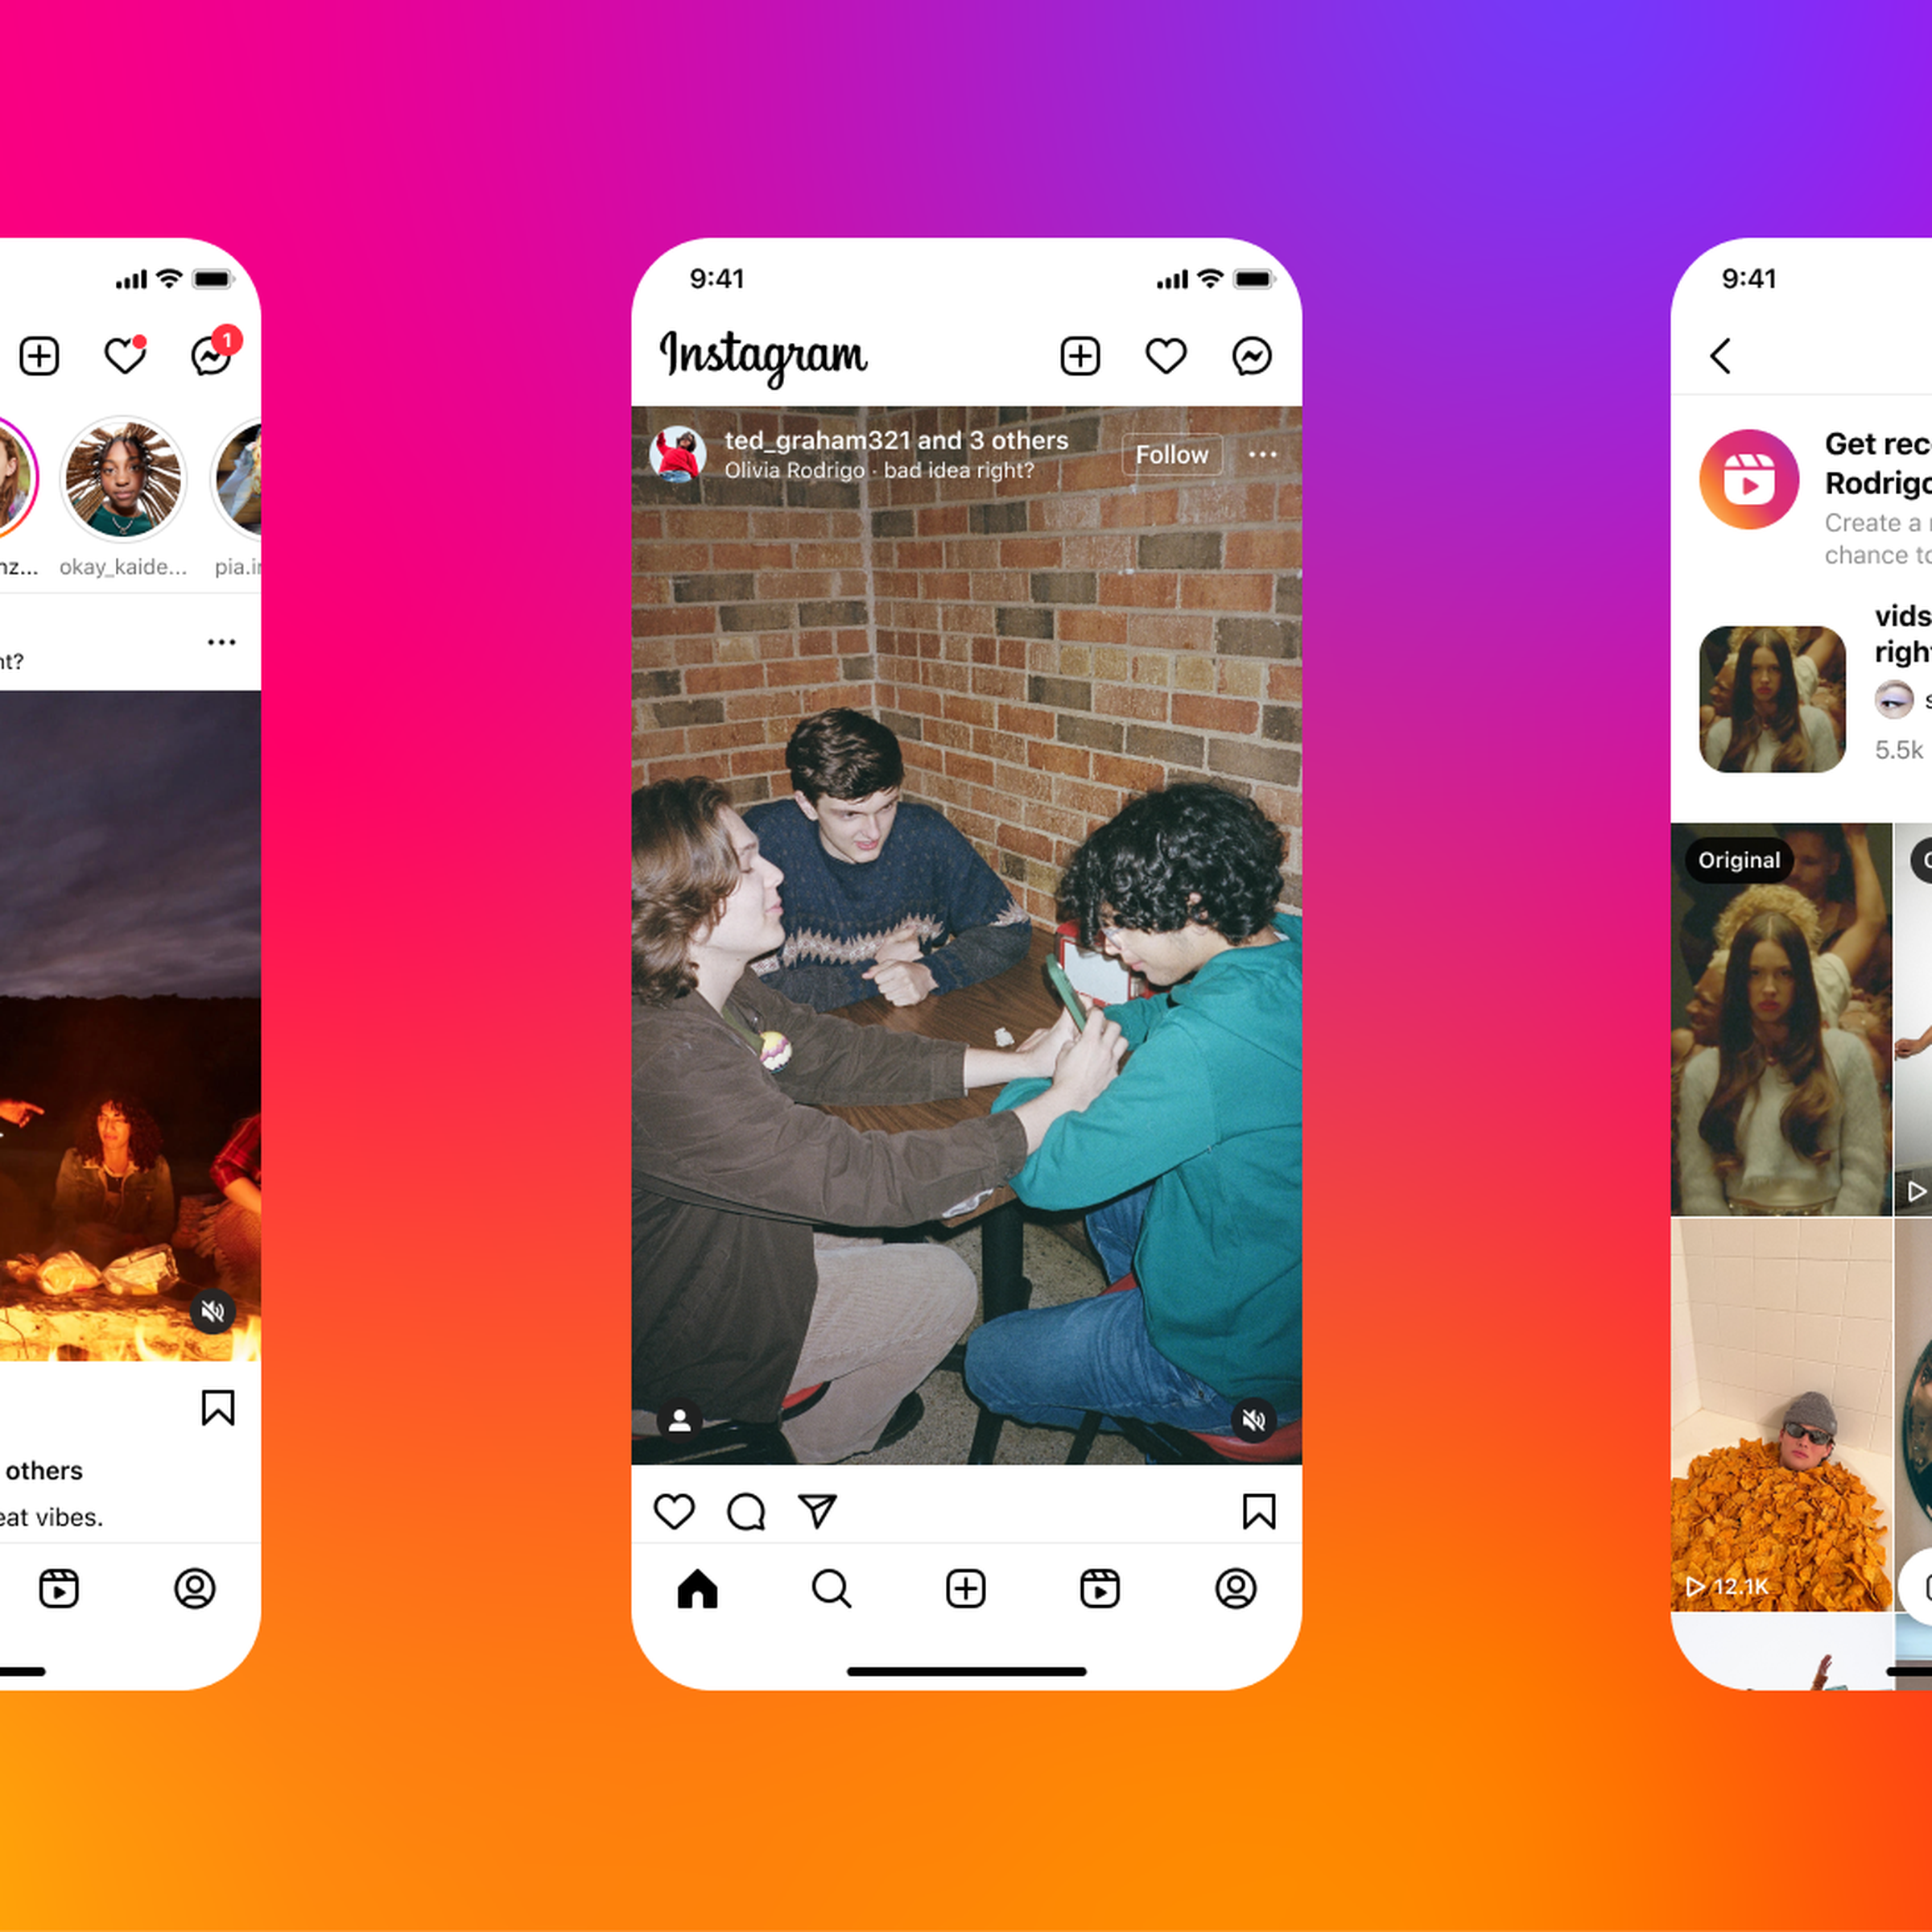 Instagram screens showing a song added to grid posts and pinned reels using artists’ music.